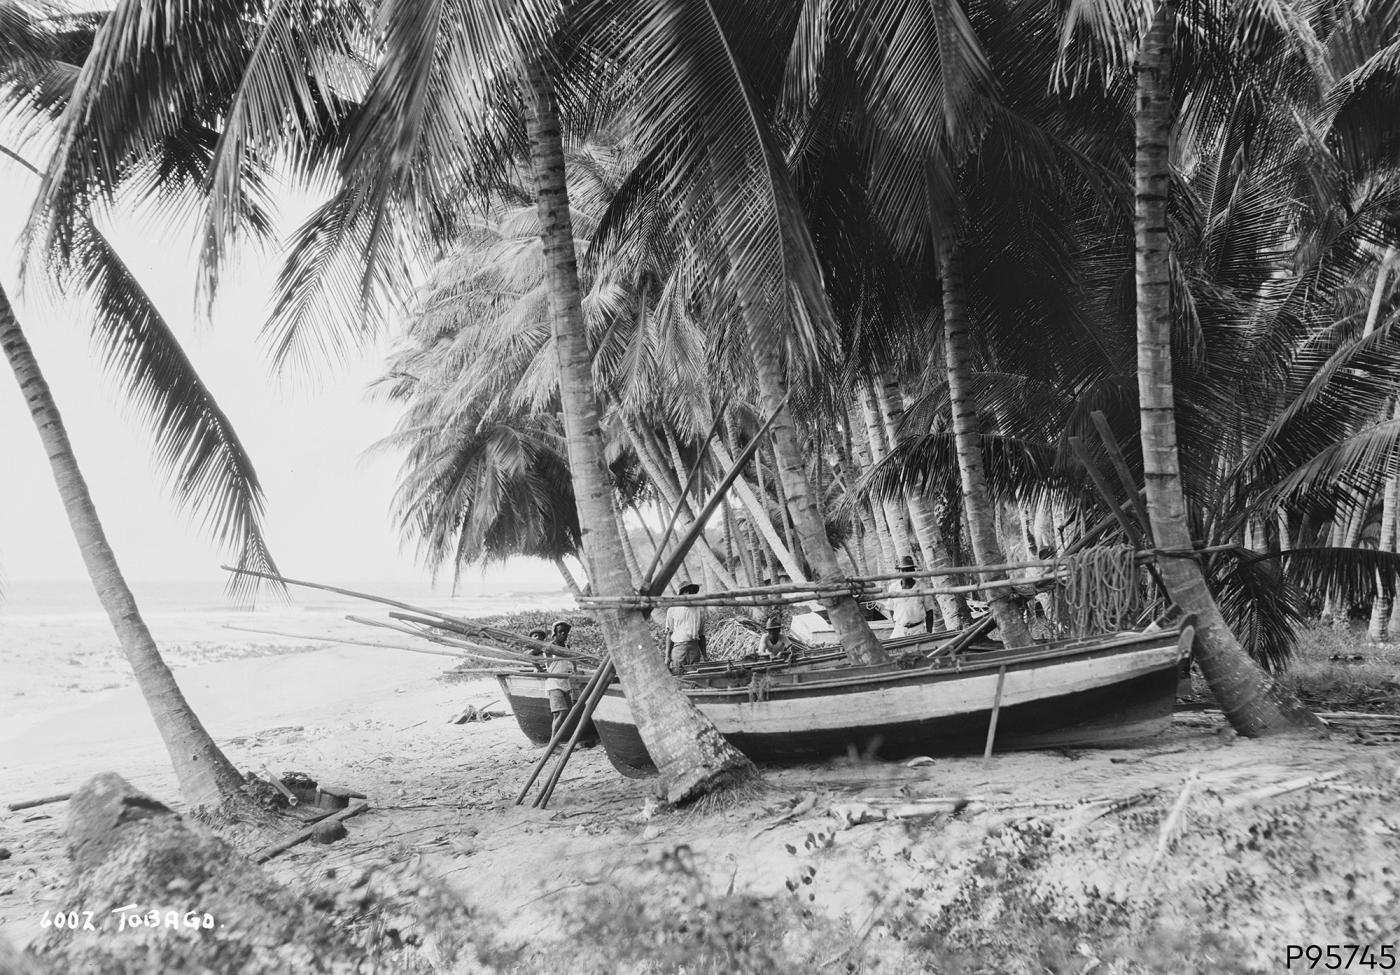 An image showing 'Tobago, West Indies'